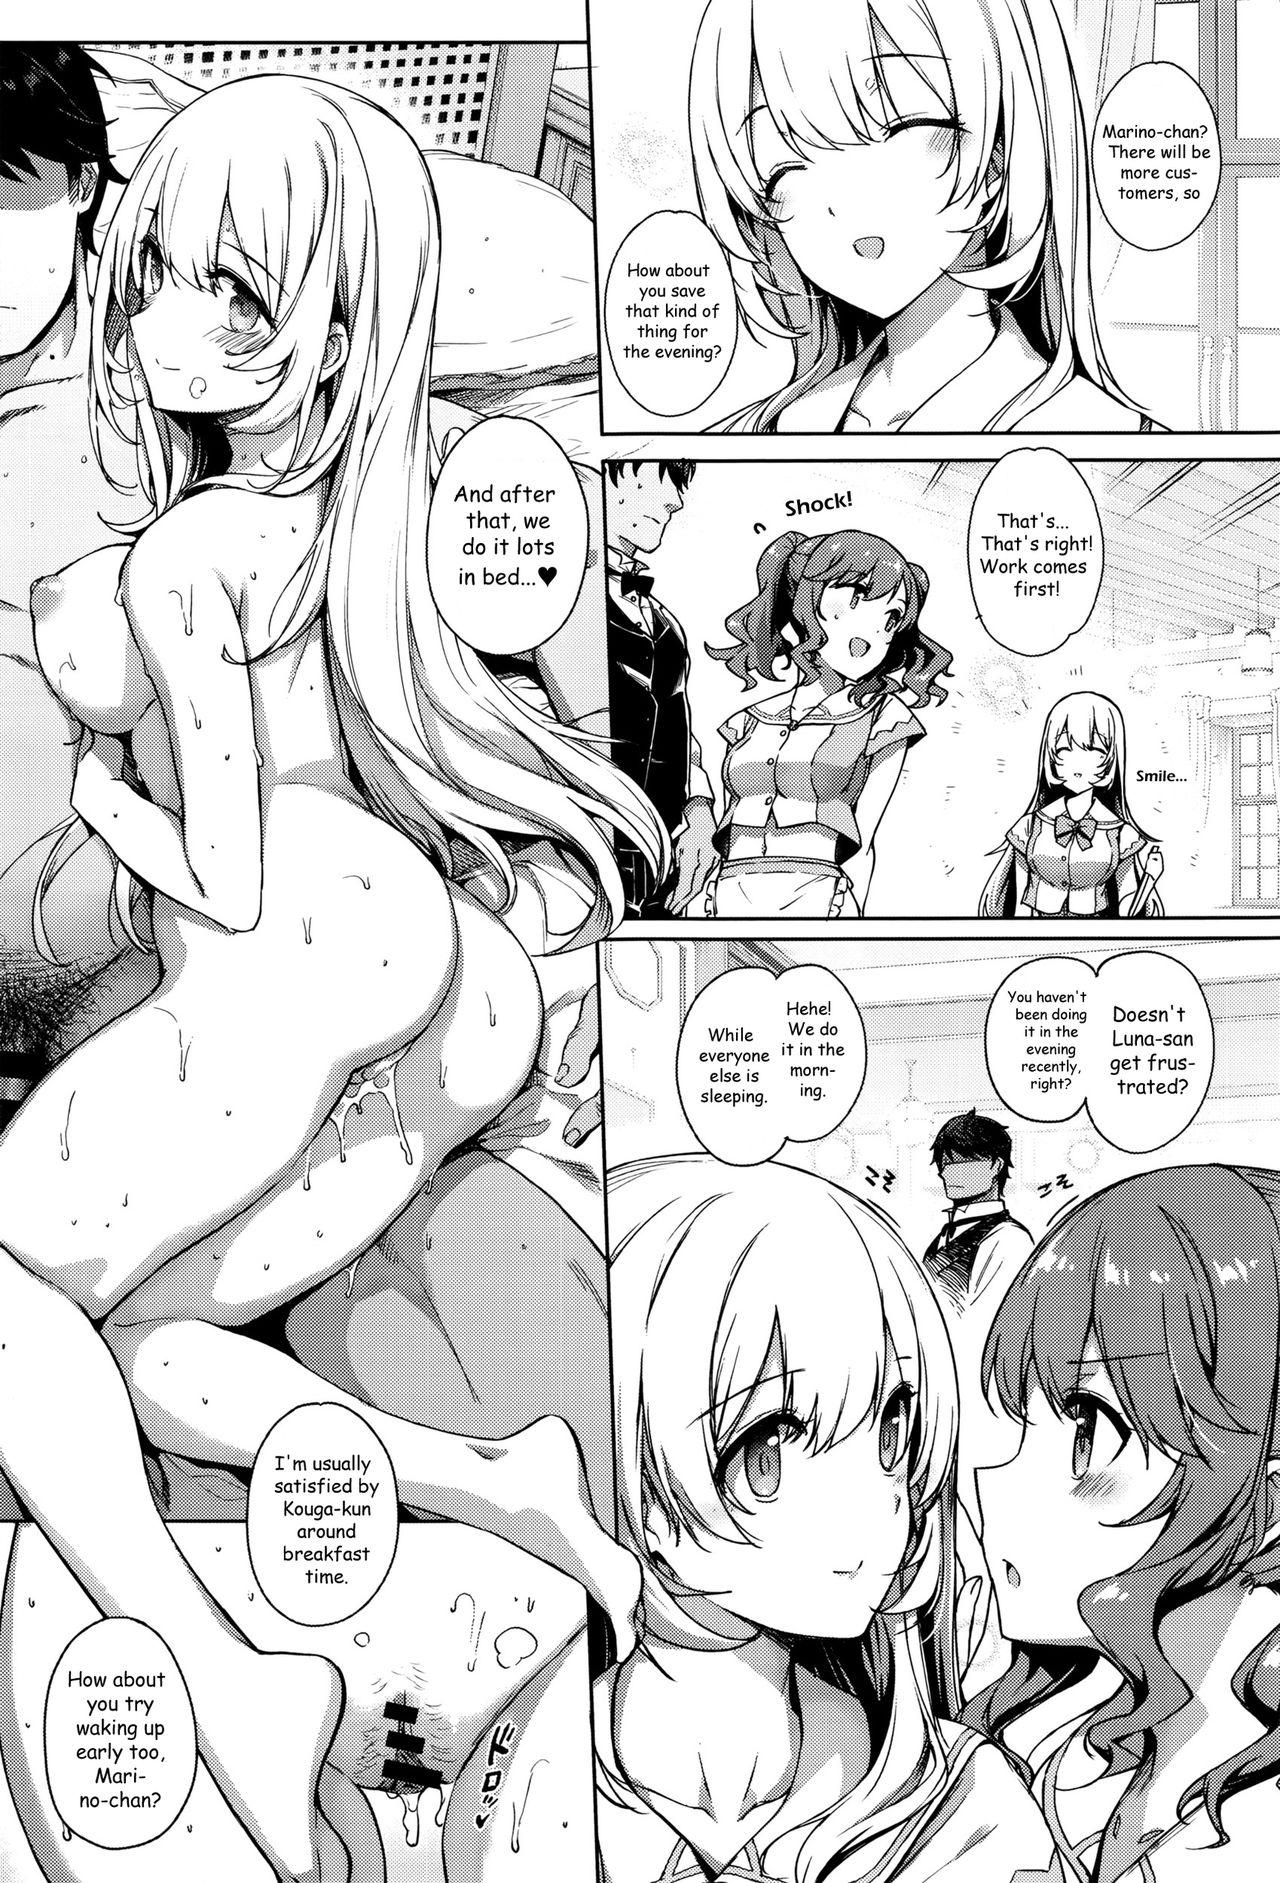 Horny Slut Aquania Marriage Life Tanned - Page 9